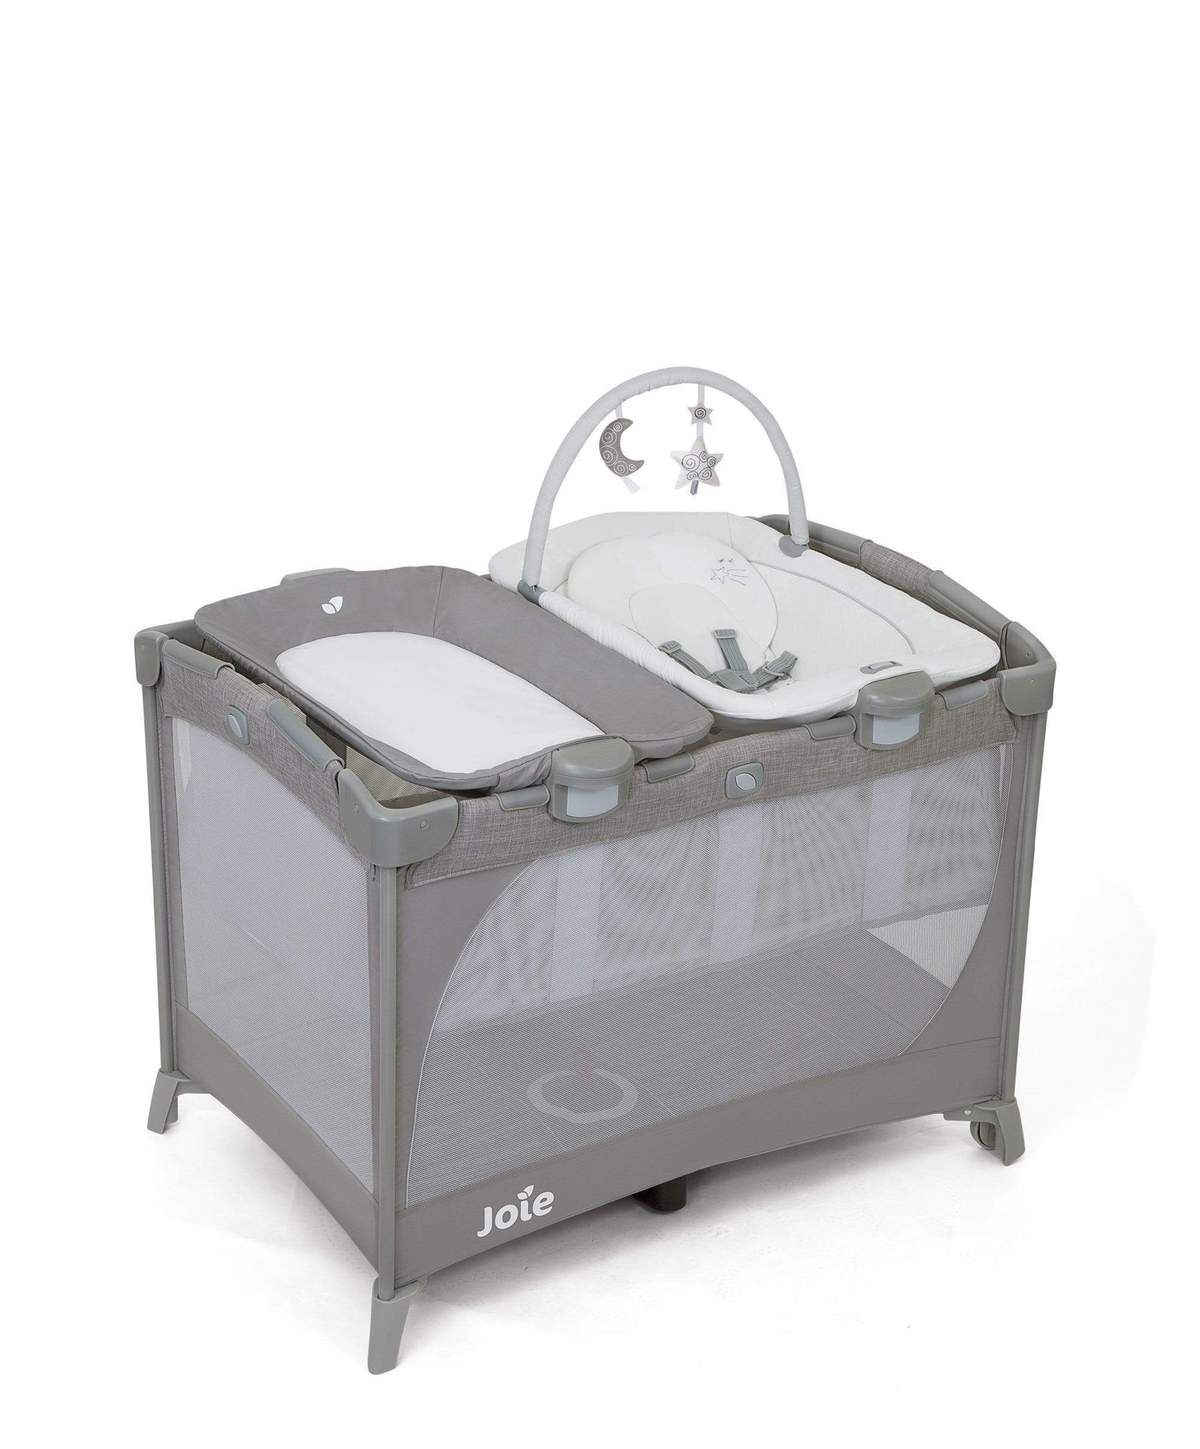 <p><strong>£165.00</strong></p><p><a href="https://www.mamasandpapas.com/products/joie-commuter-travel-cot-change-bounce-starry-night-599012b00">Shop Now</a></p><p>Weighing in at 12.3kg this travel cot sits at the bulkier end of the portable crib spectrum, so it's better suited to family holidays with access to a car boot than public transport. But once you have arrived at your villa/hotel and erected your temporary baby nest, the removable bassinet and vibrating bouncer complete with toy bar will make relaxing on holiday a breeze. Our panel of mum testers were impressed with how simple it was to assemble, plus integrated wheels made it easy to keep baby close by at nap times.</p><p><strong>Dimensions</strong>: 106cm x 70.5cm x 80cm</p><p><strong>Folded size</strong>: 79cm x w 25cm x h 21cm</p><p><strong>Weight</strong>: 12.3kg</p>